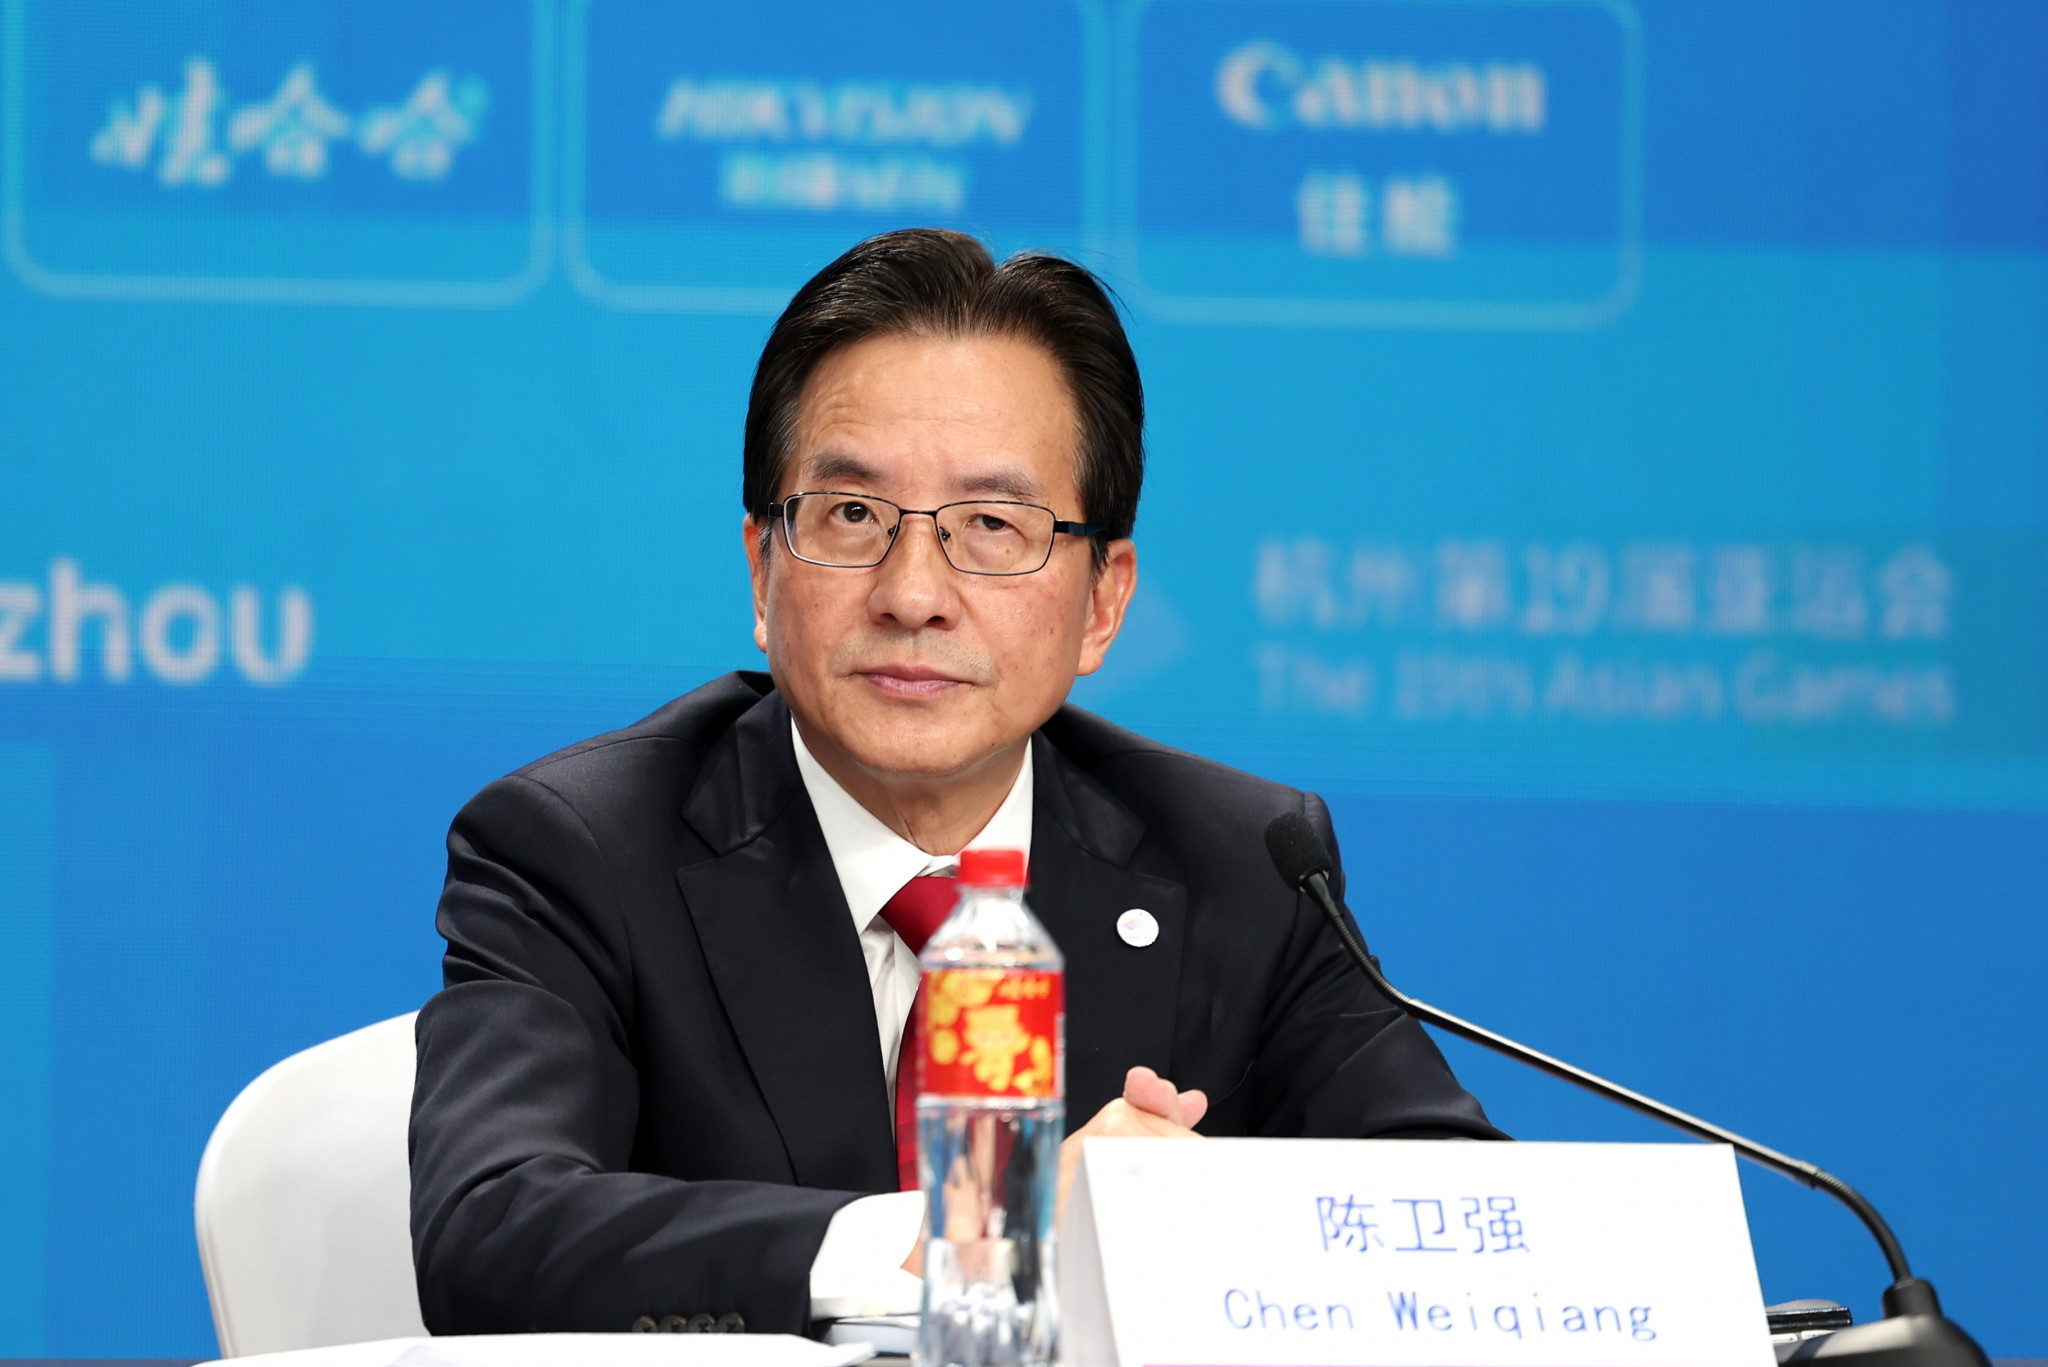 Deputy Mayor of Hangzhou Chen Weiqiang has said that officials in the Chinese city were not considering bidding for the Olympics ©Hangzhou 2022